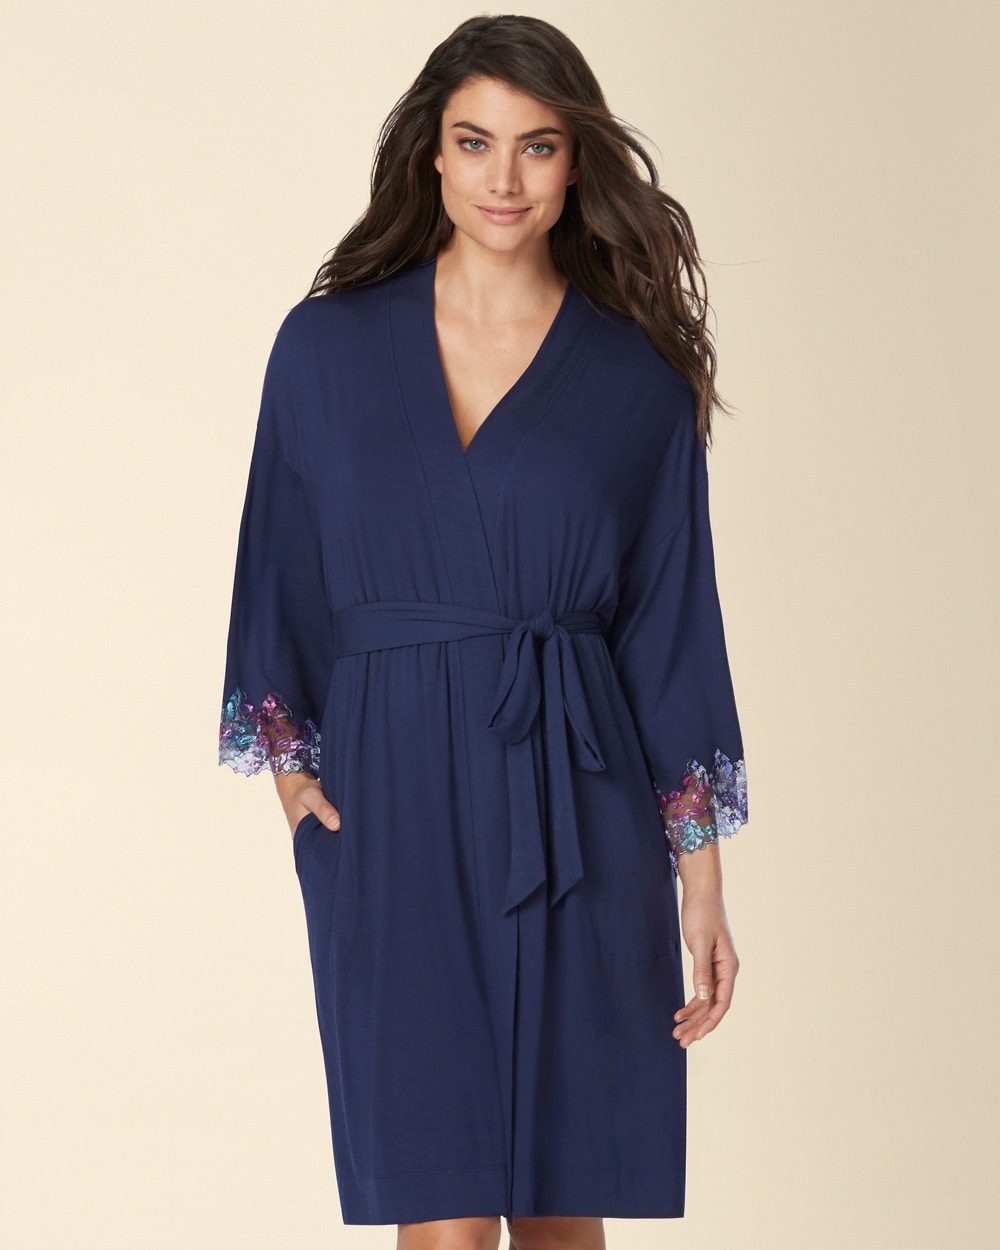 Limited Edition Endearing Lace Short Robe Navy